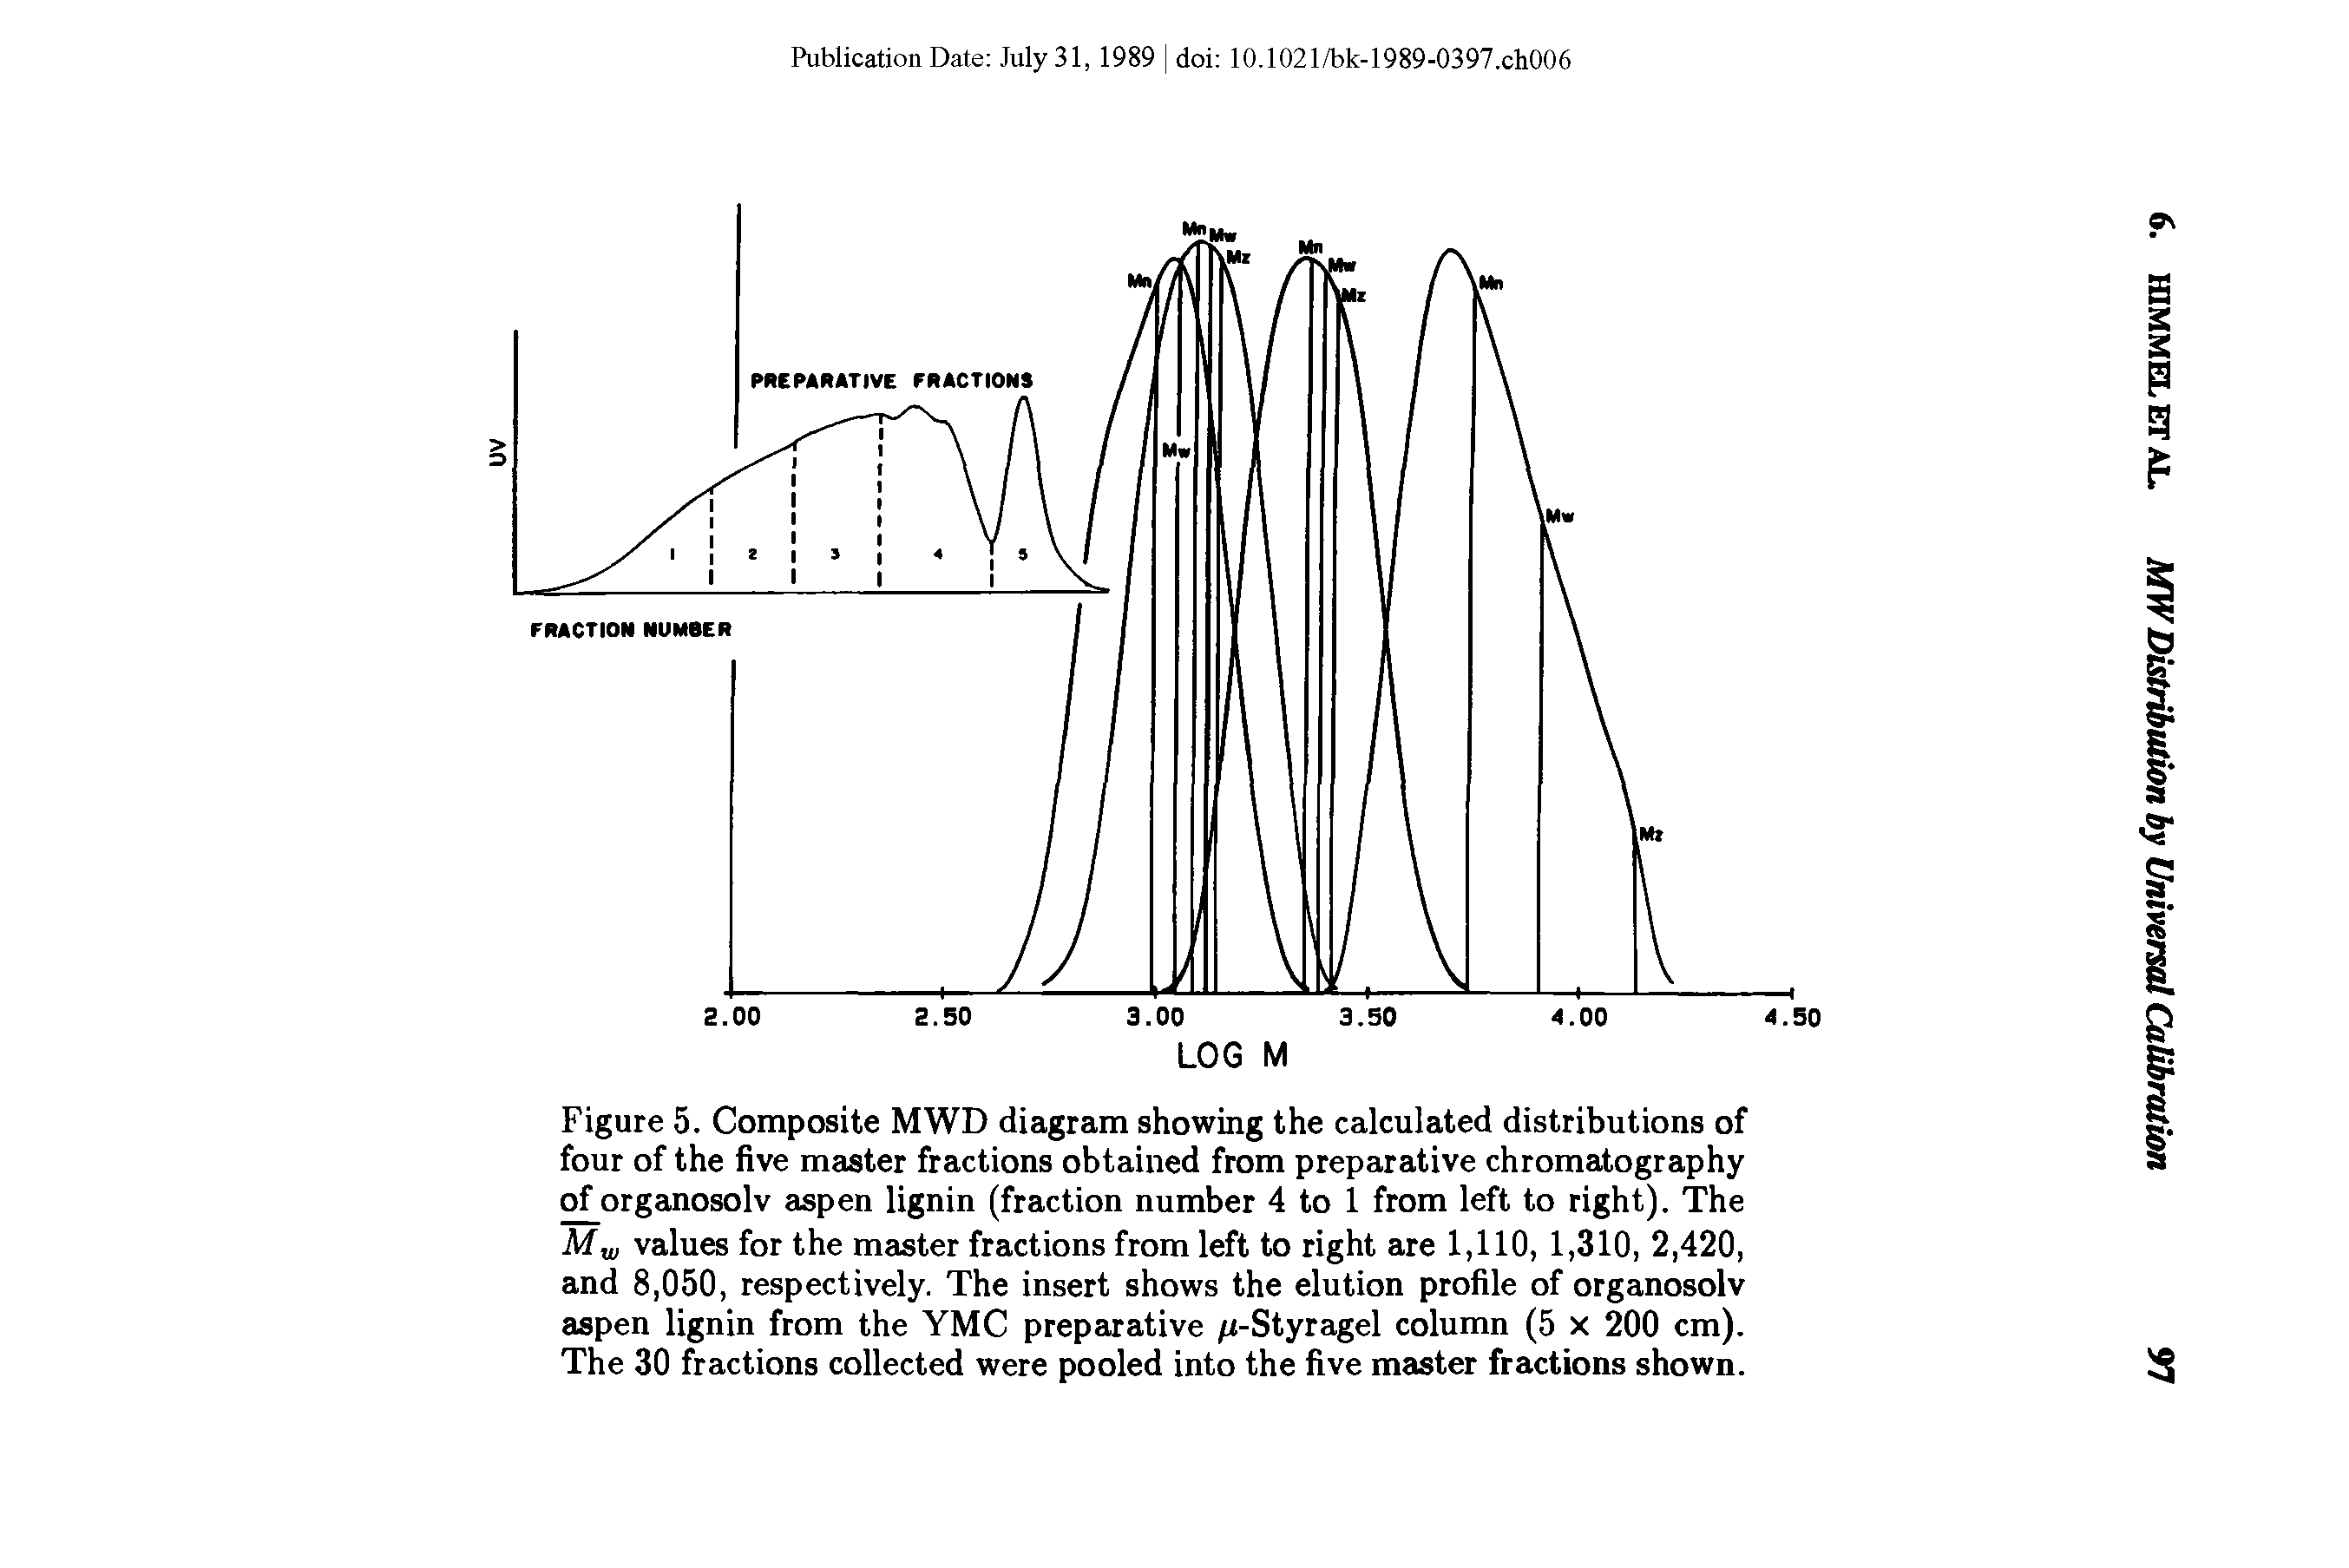 Figure 5. Composite MWD diagram showing the calculated distributions of four of the five master fractions obtained from preparative chromatography of organosolv aspen lignin (fraction number 4 to 1 from left to right). The Mw values for the master fractions from left to right are 1,110, 1,310, 2,420, and 8,050, respectively. The insert shows the elution profile of organosolv aspen lignin from the YMC preparative /z-Styragel column (5 x 200 cm). The 30 fractions collected were pooled into the five master fractions shown.